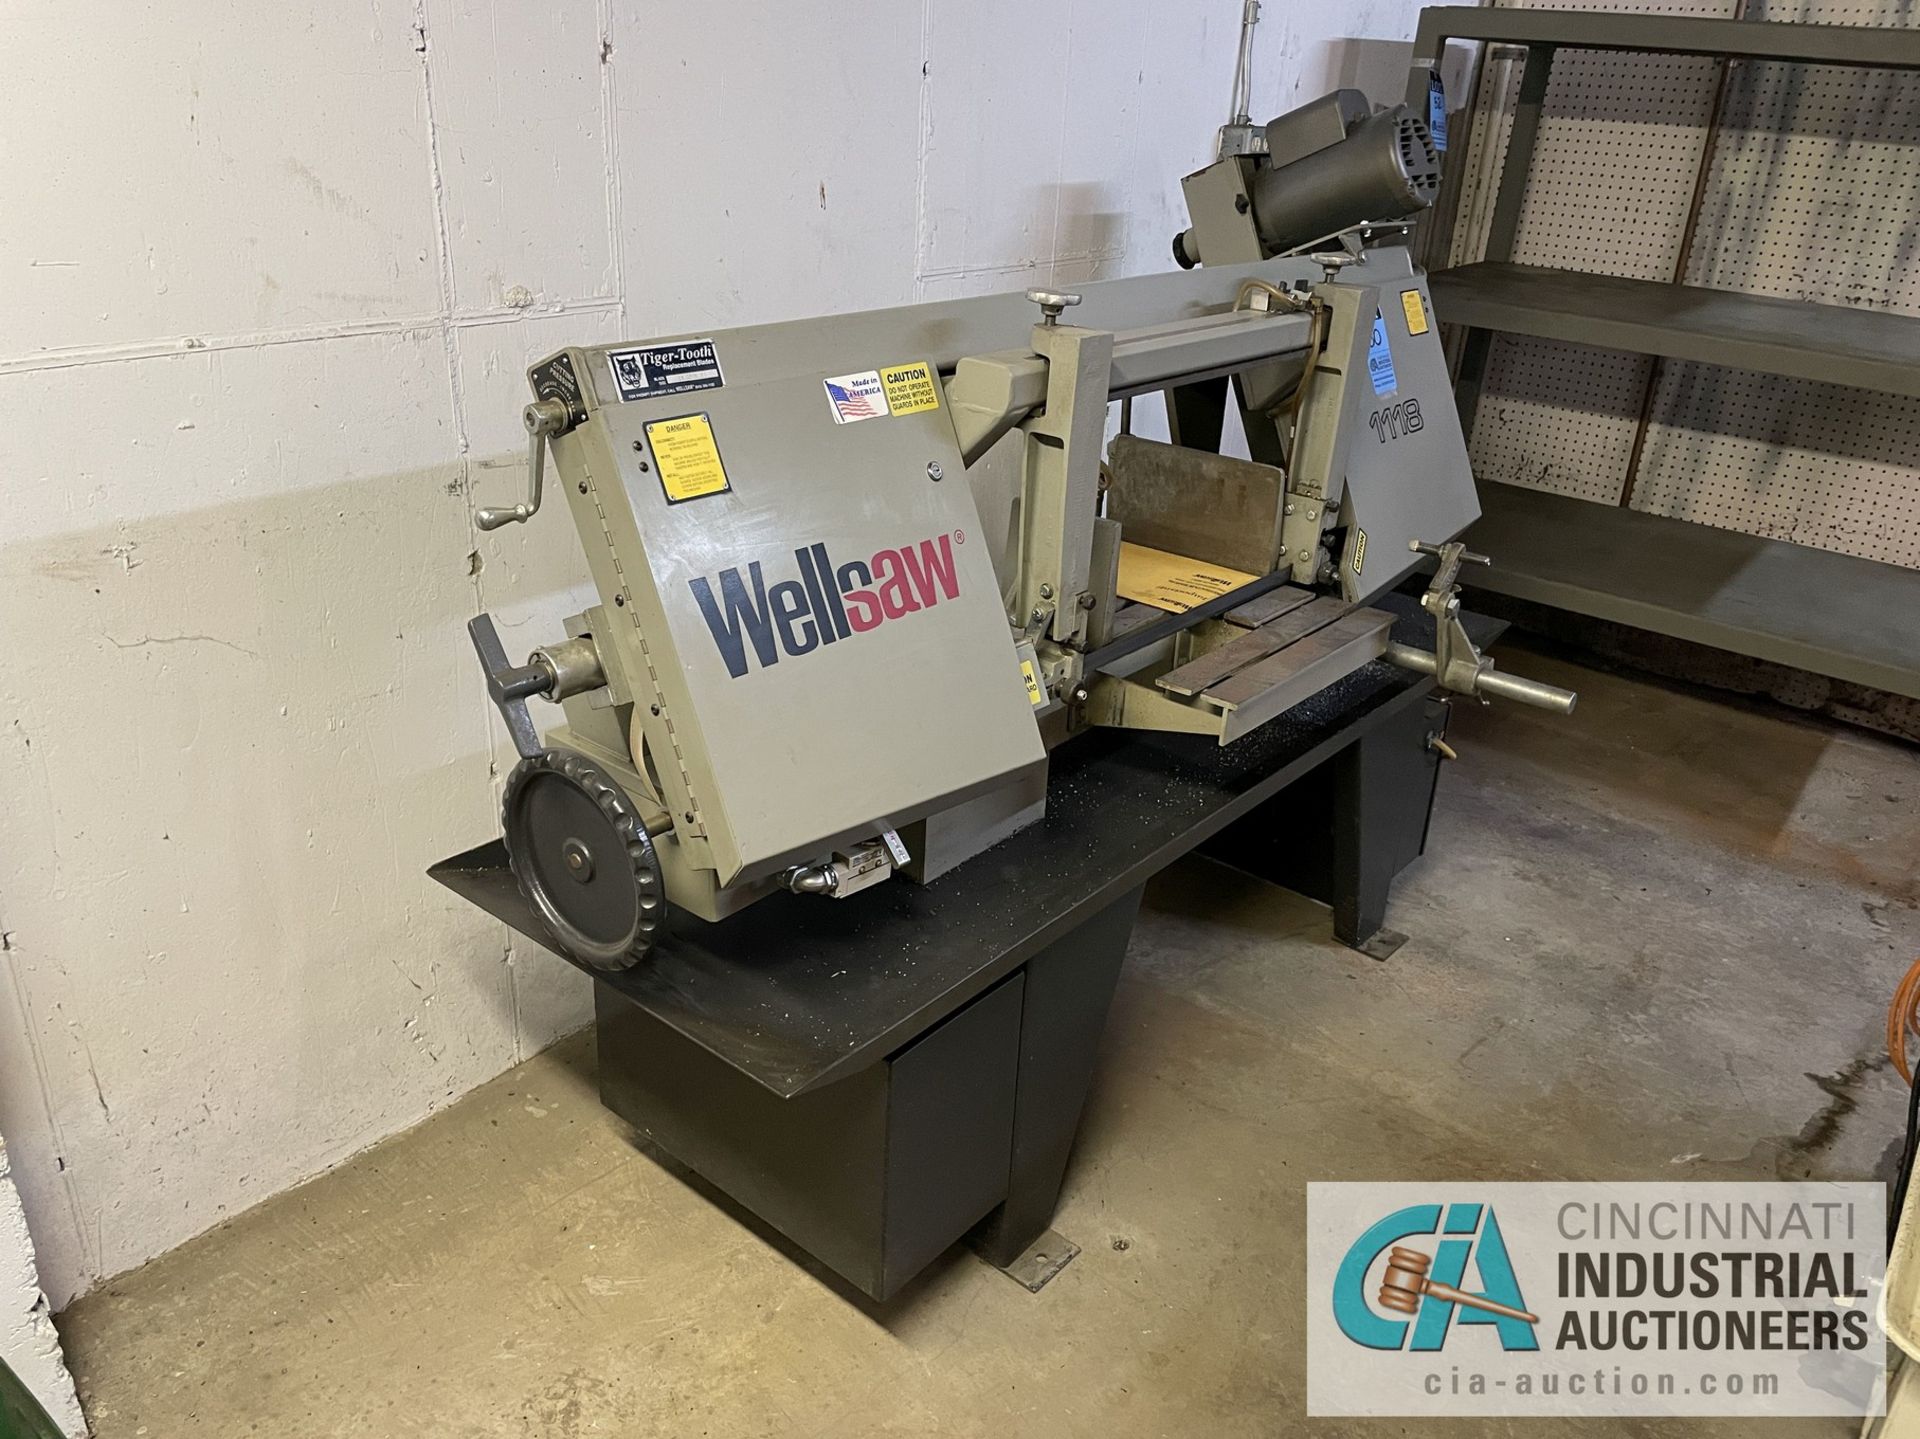 13" X 18" WELLSAW MODEL 1118 HORIZONTAL BAND SAW; S/N 3489, SINGLE PHASE, 115 VOLTS, 2 HP MOTOR - Image 2 of 12